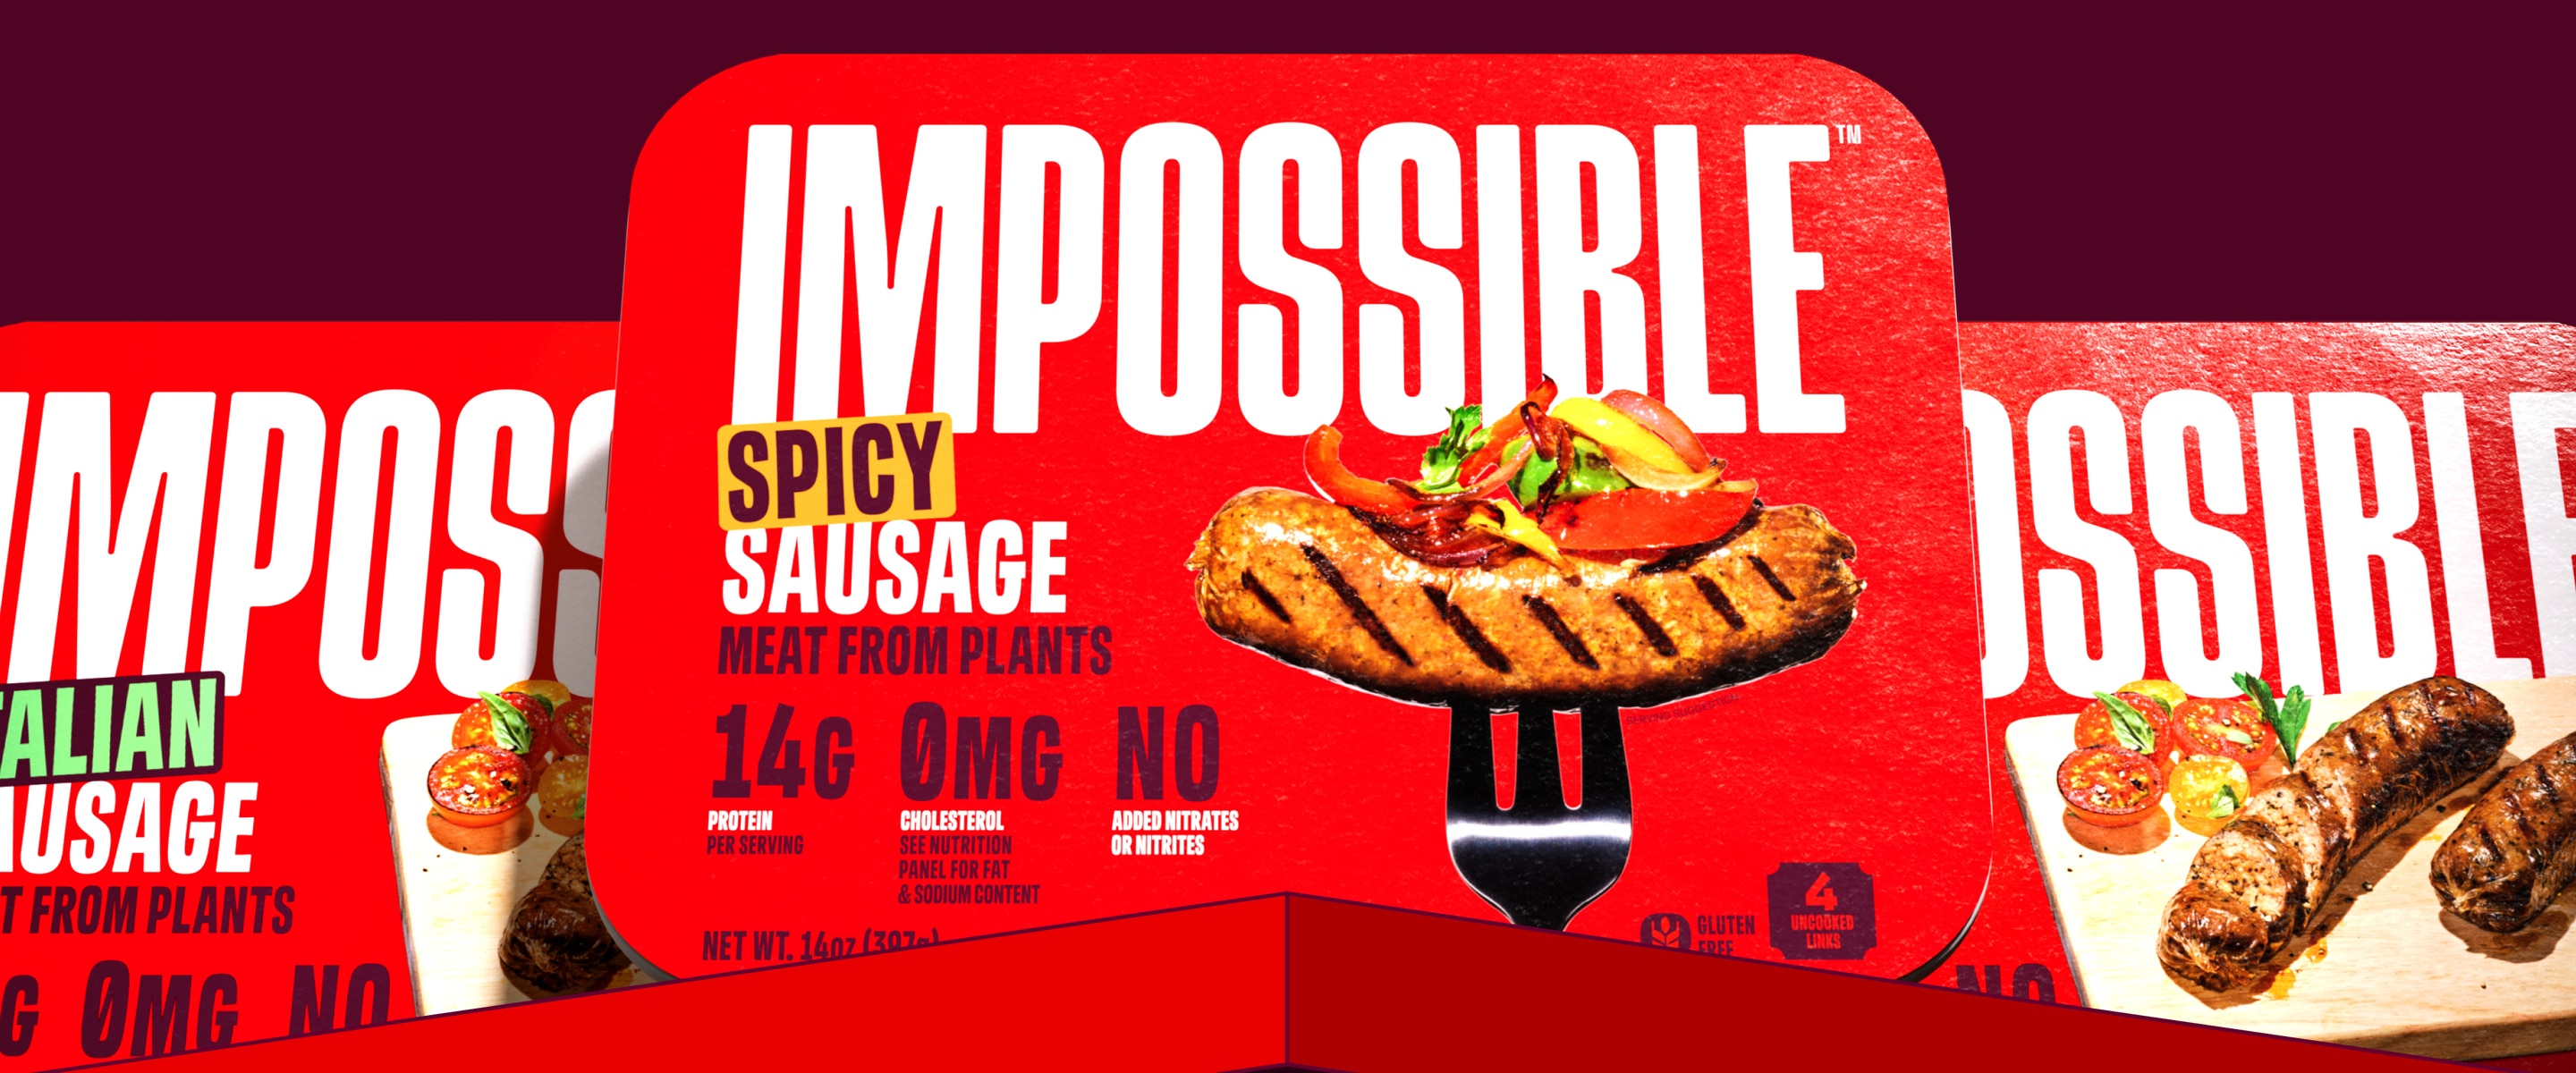 Red Is the New Green: Why Plant-Based Brands Need to Change Color to Entice Meat Eaters